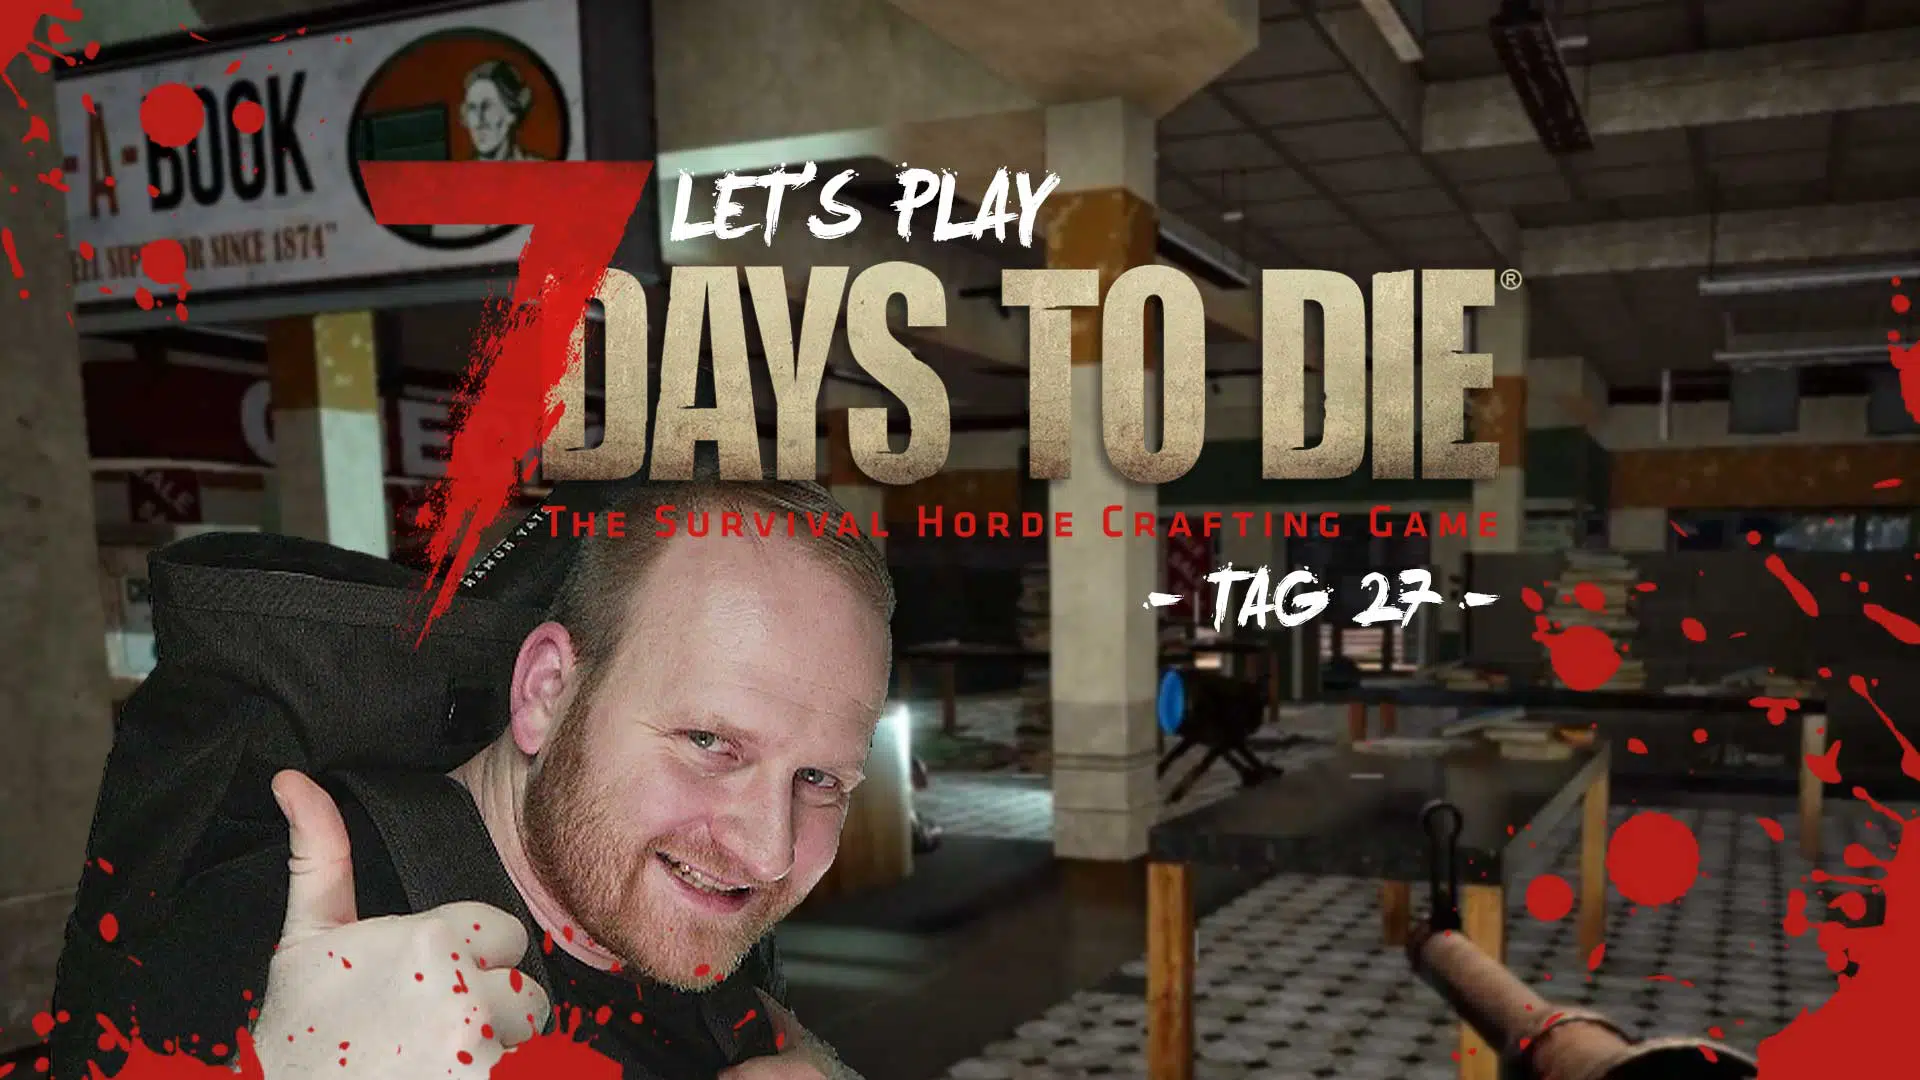 lets play 7 days to die tag 27 GG